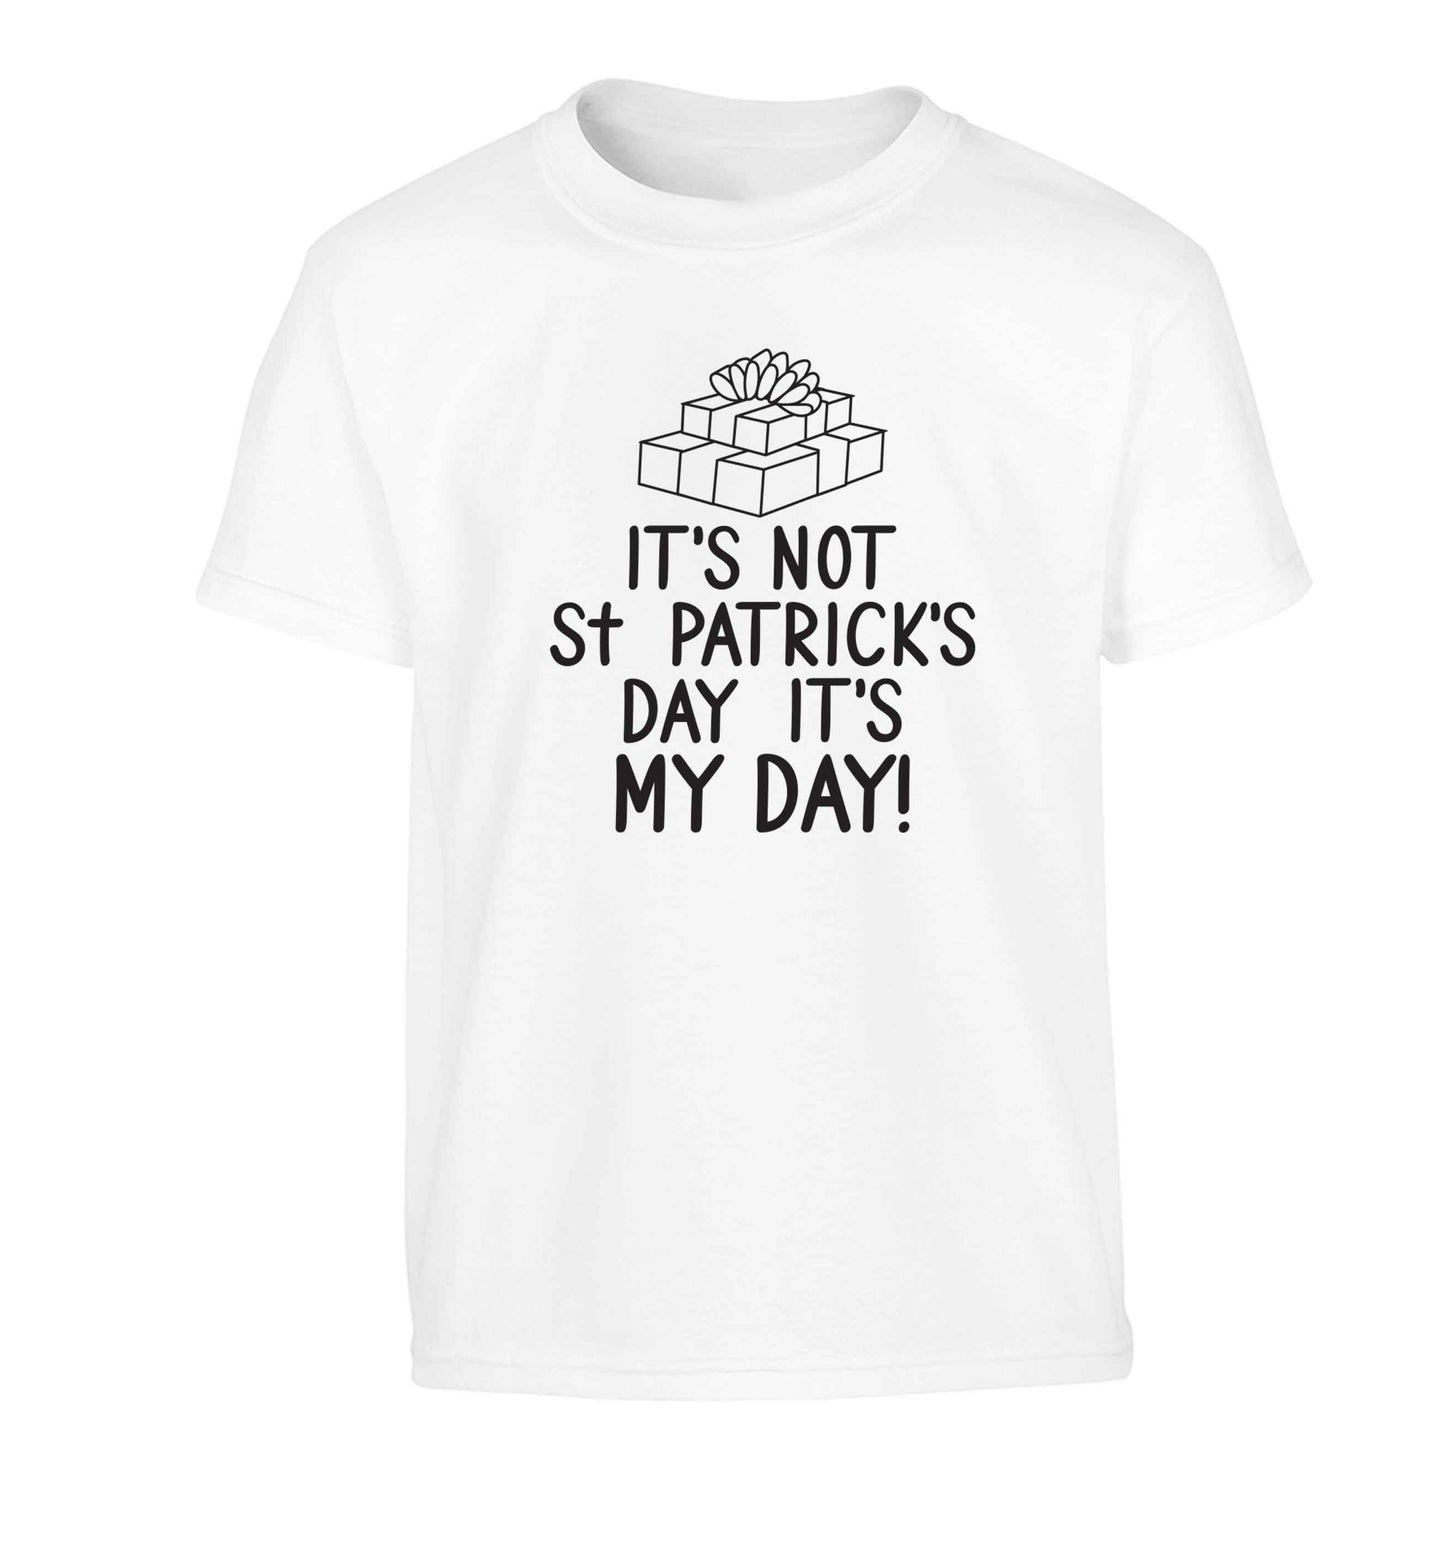 Funny gifts for your mum on mother's dayor her birthday! It's not St Patricks day it's my day Children's white Tshirt 12-13 Years